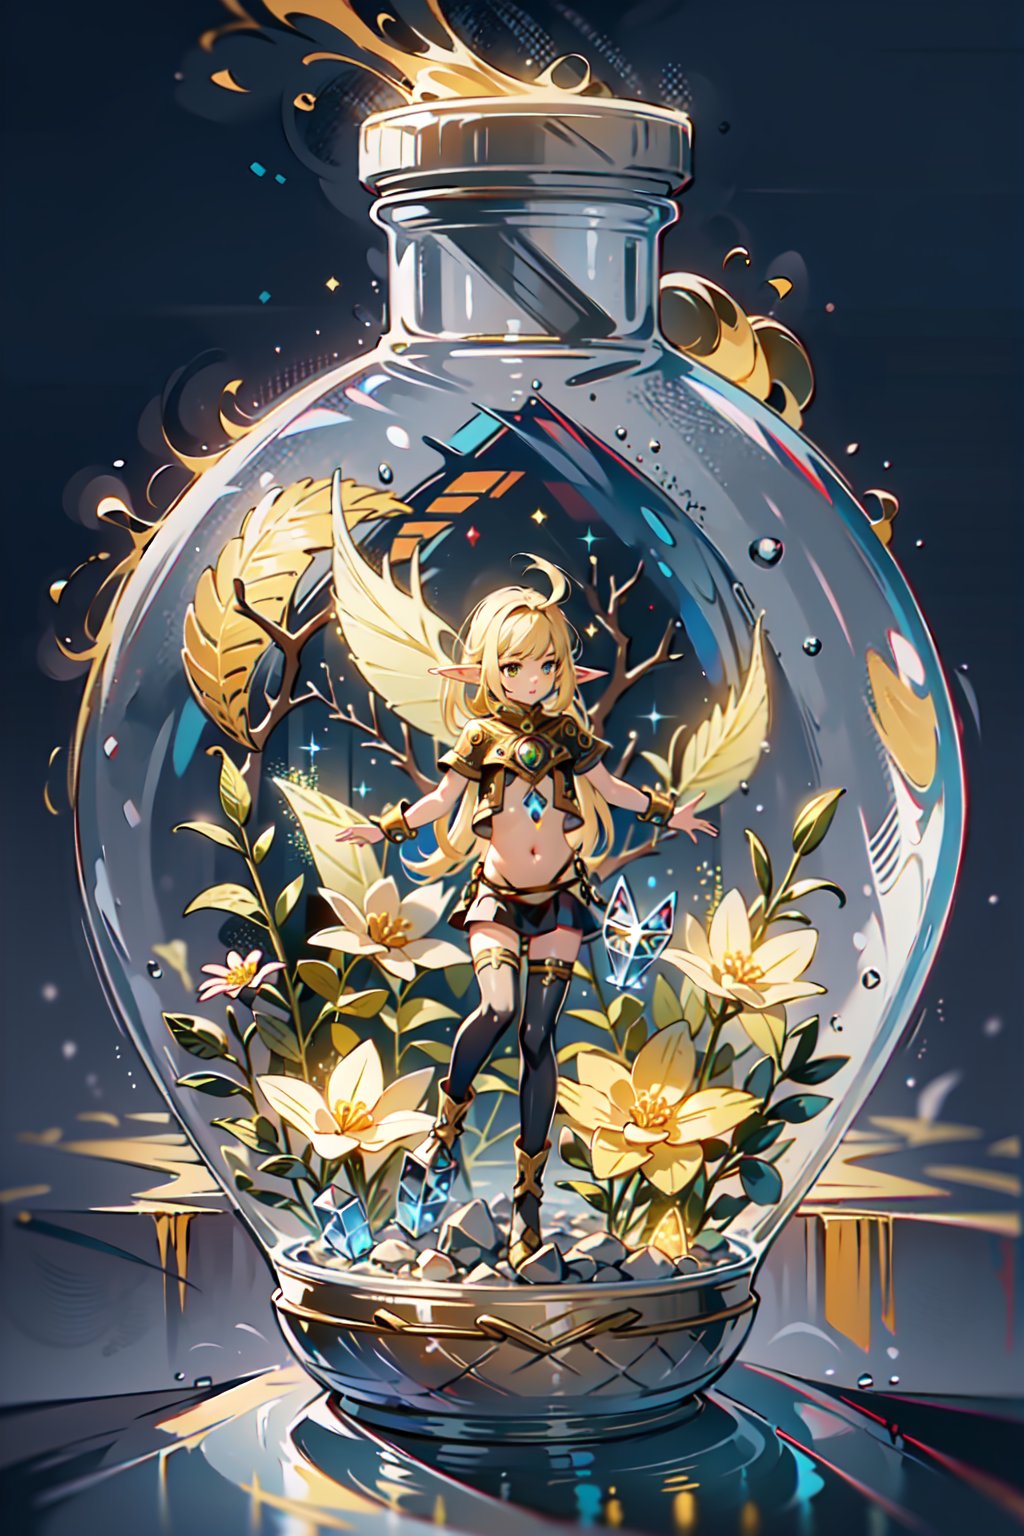 Highres, best quality, extremely detailed, area lighting in background, HD, 8k, extremely intricate:1.3), 1 girl, realistic, SMALL BODY, CUTE, GlowingRunes_yellow, stomach, elf, fairies, phgls, in container, Transparent colorless glass bowl, colorful flowers, warm colors, very dark background, 